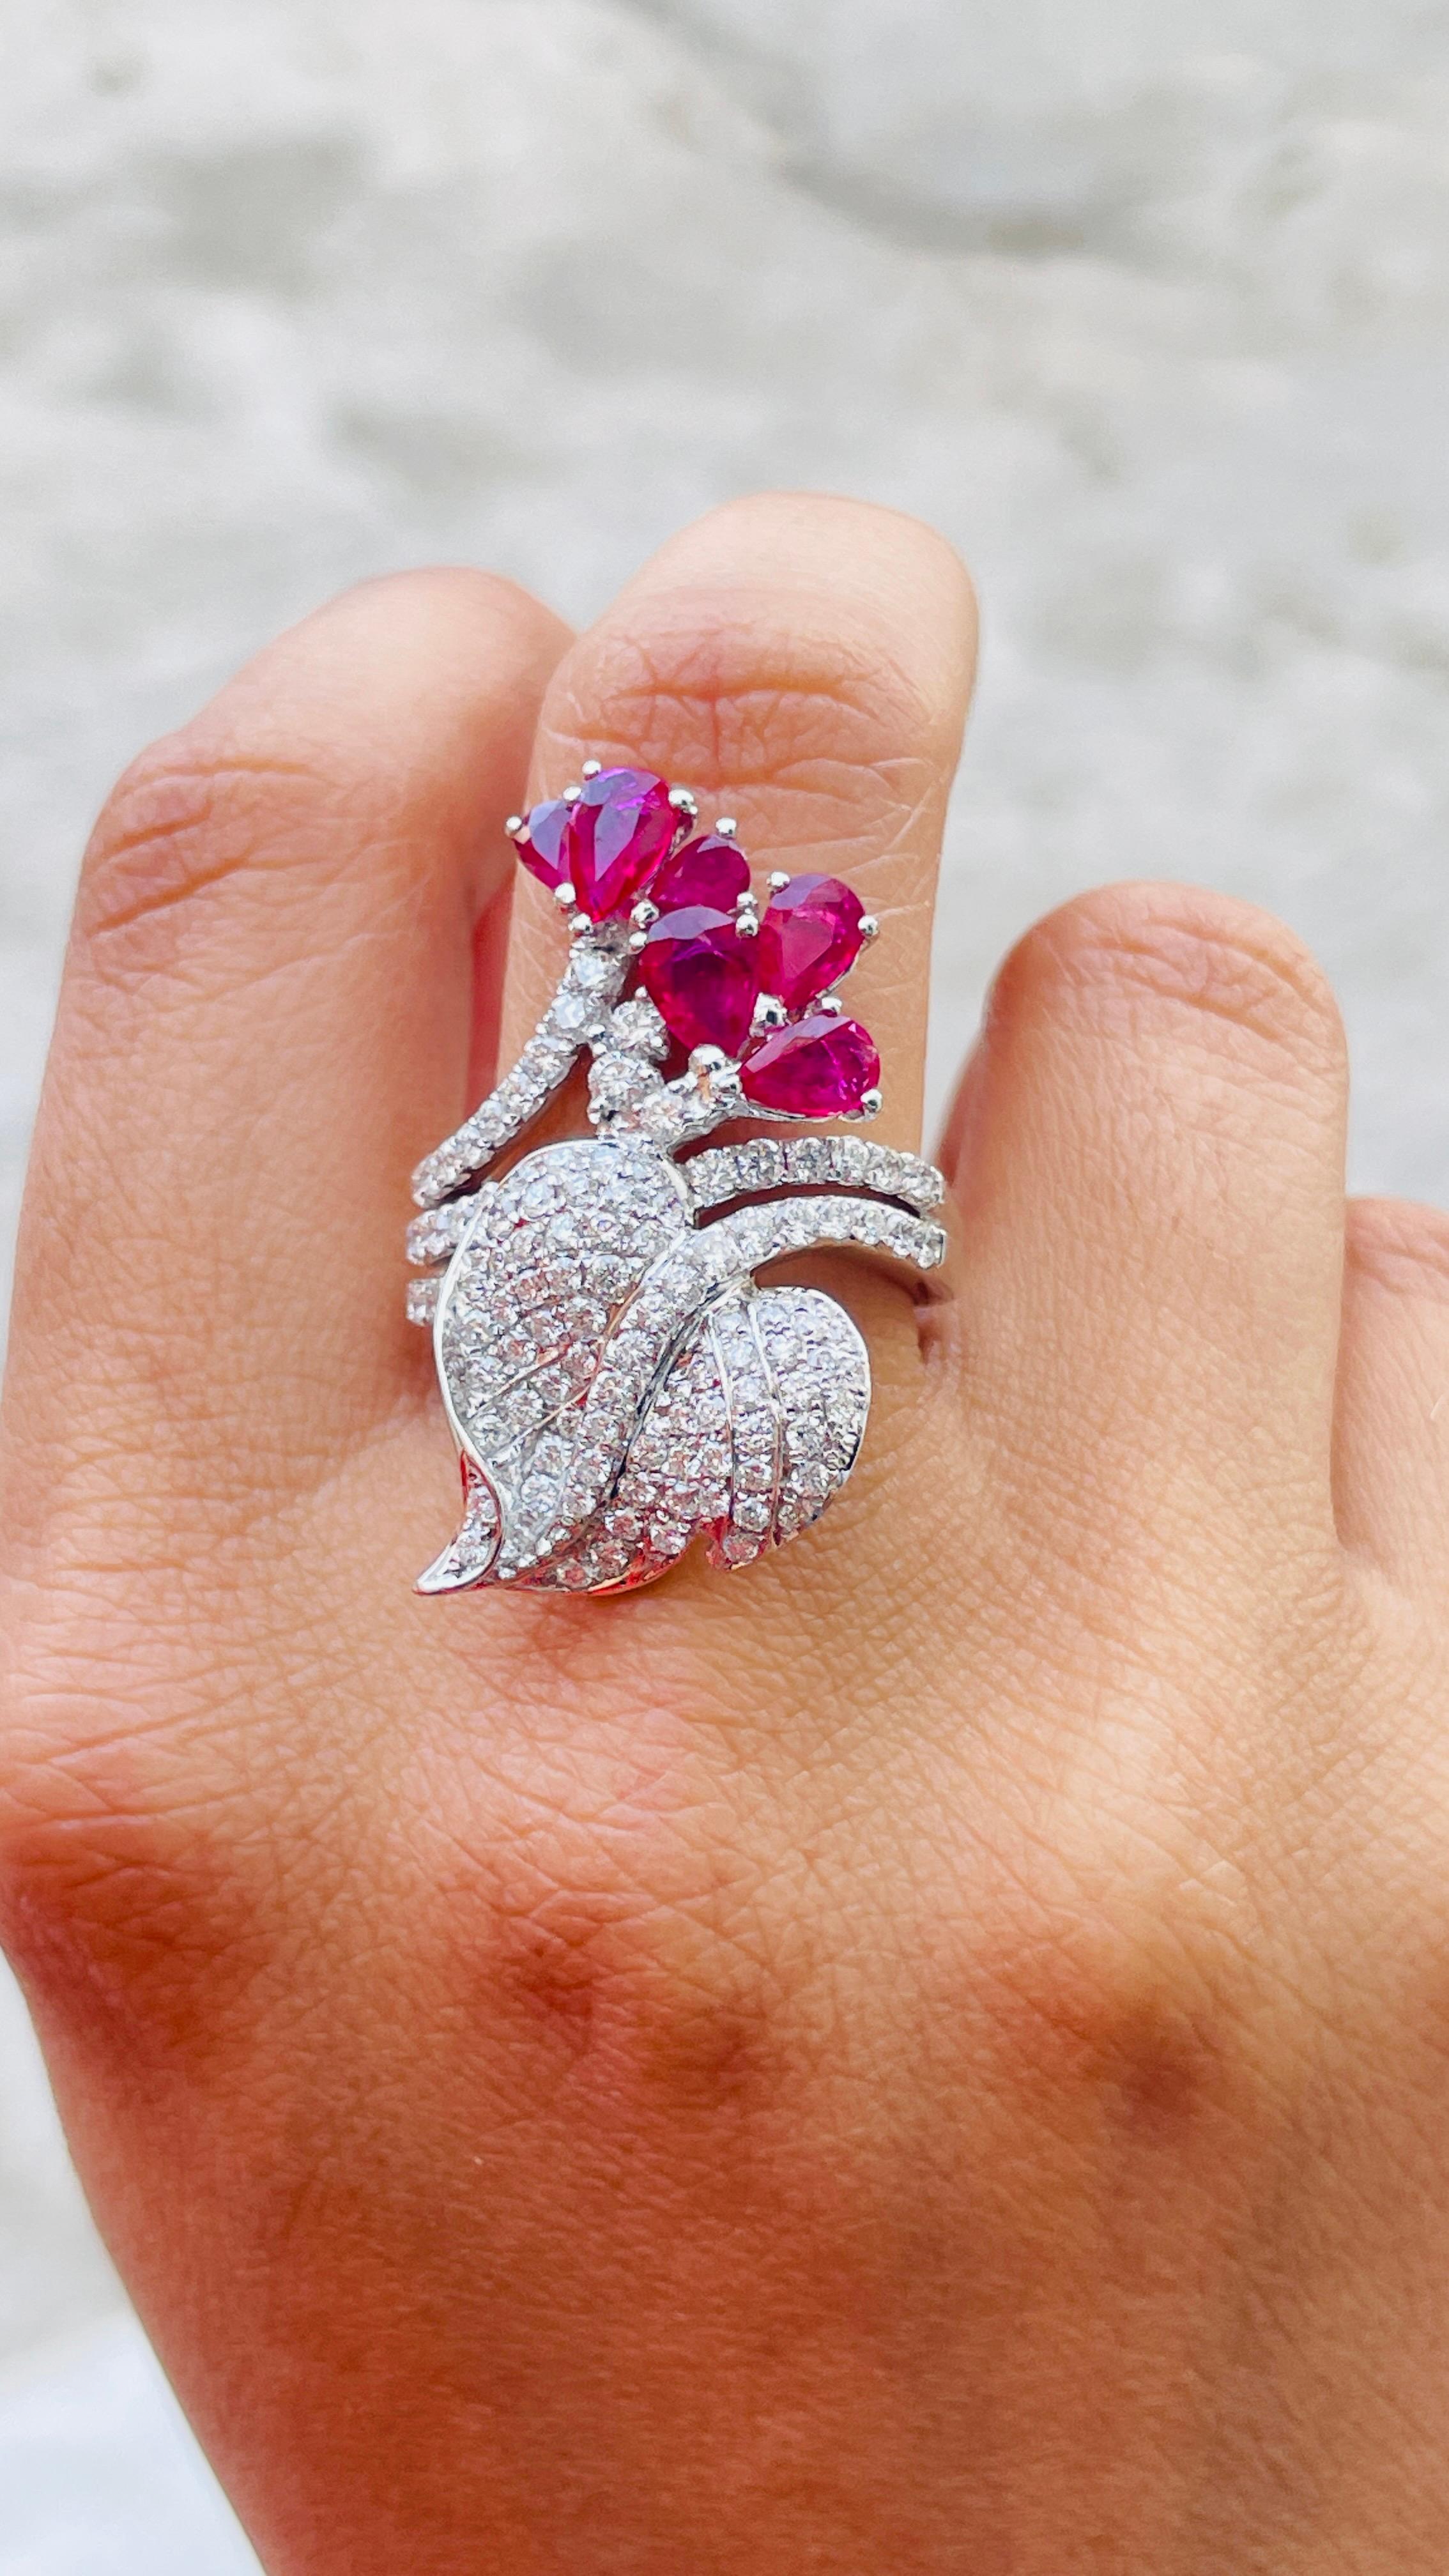 For Sale:  14K White Gold Pear Cut Ruby and Diamond Bridal Ring 5